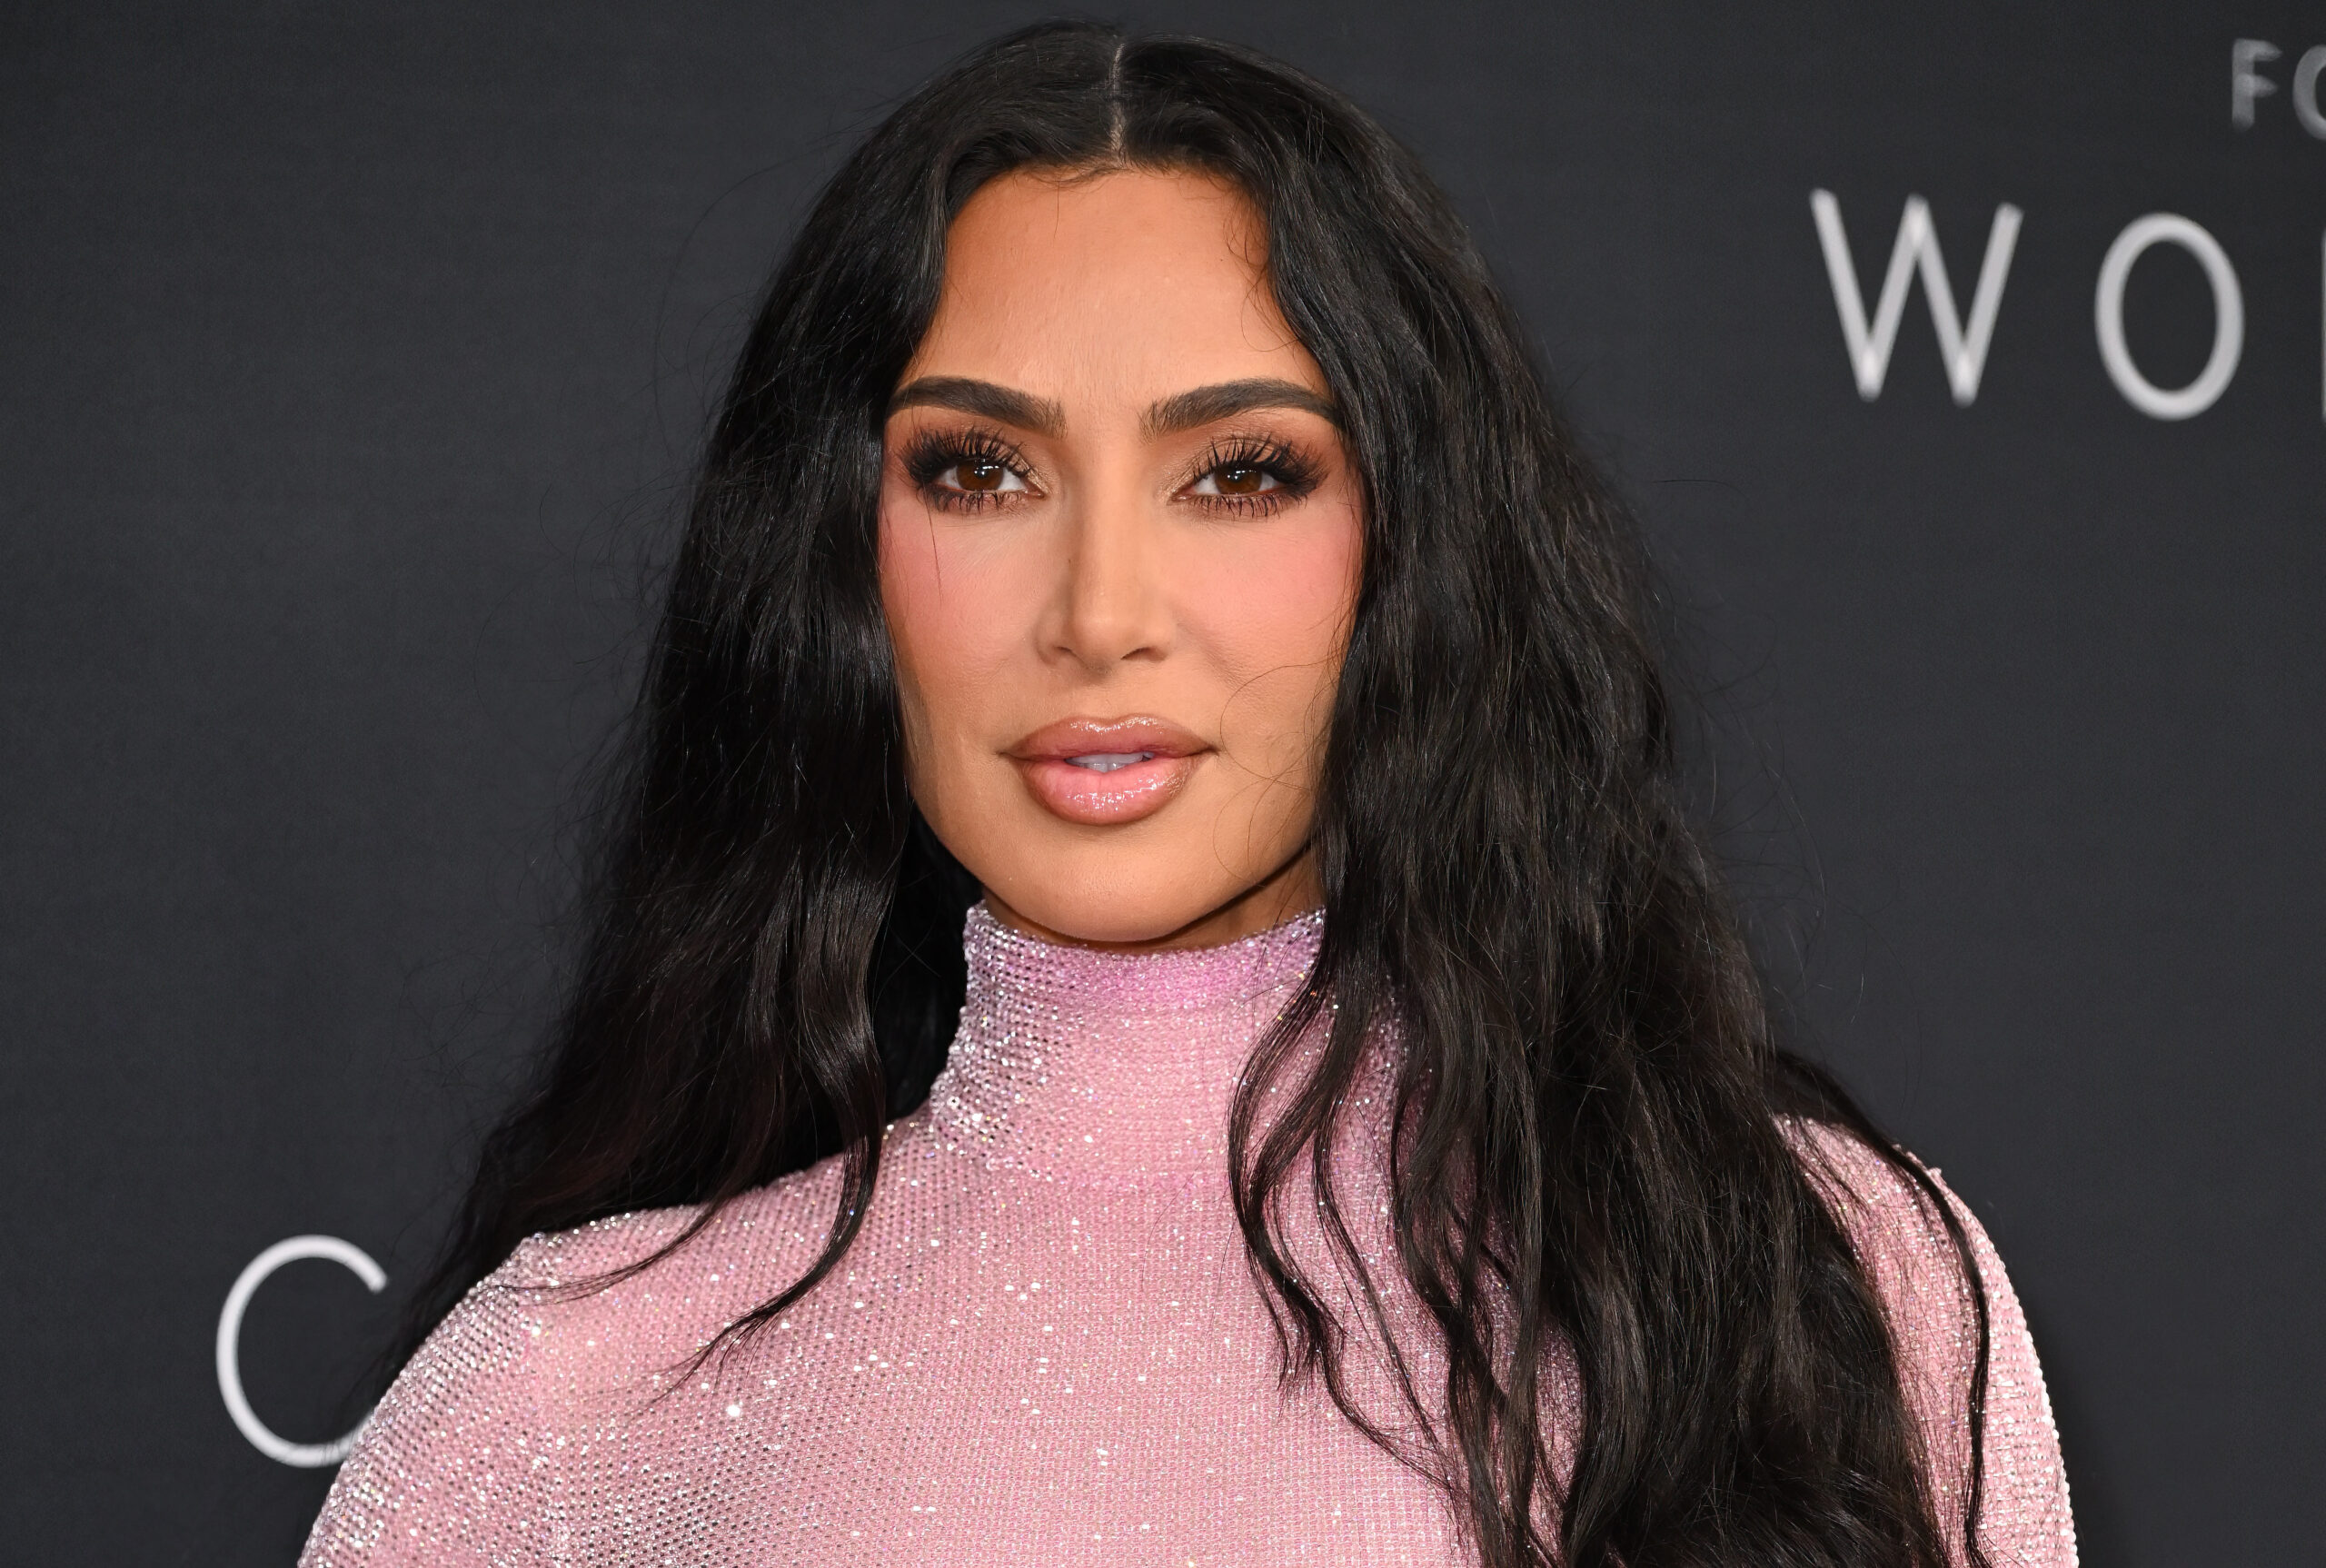 Some critics called out The Kardashians star for her bigger chin and lips in the new photos taken at the gala